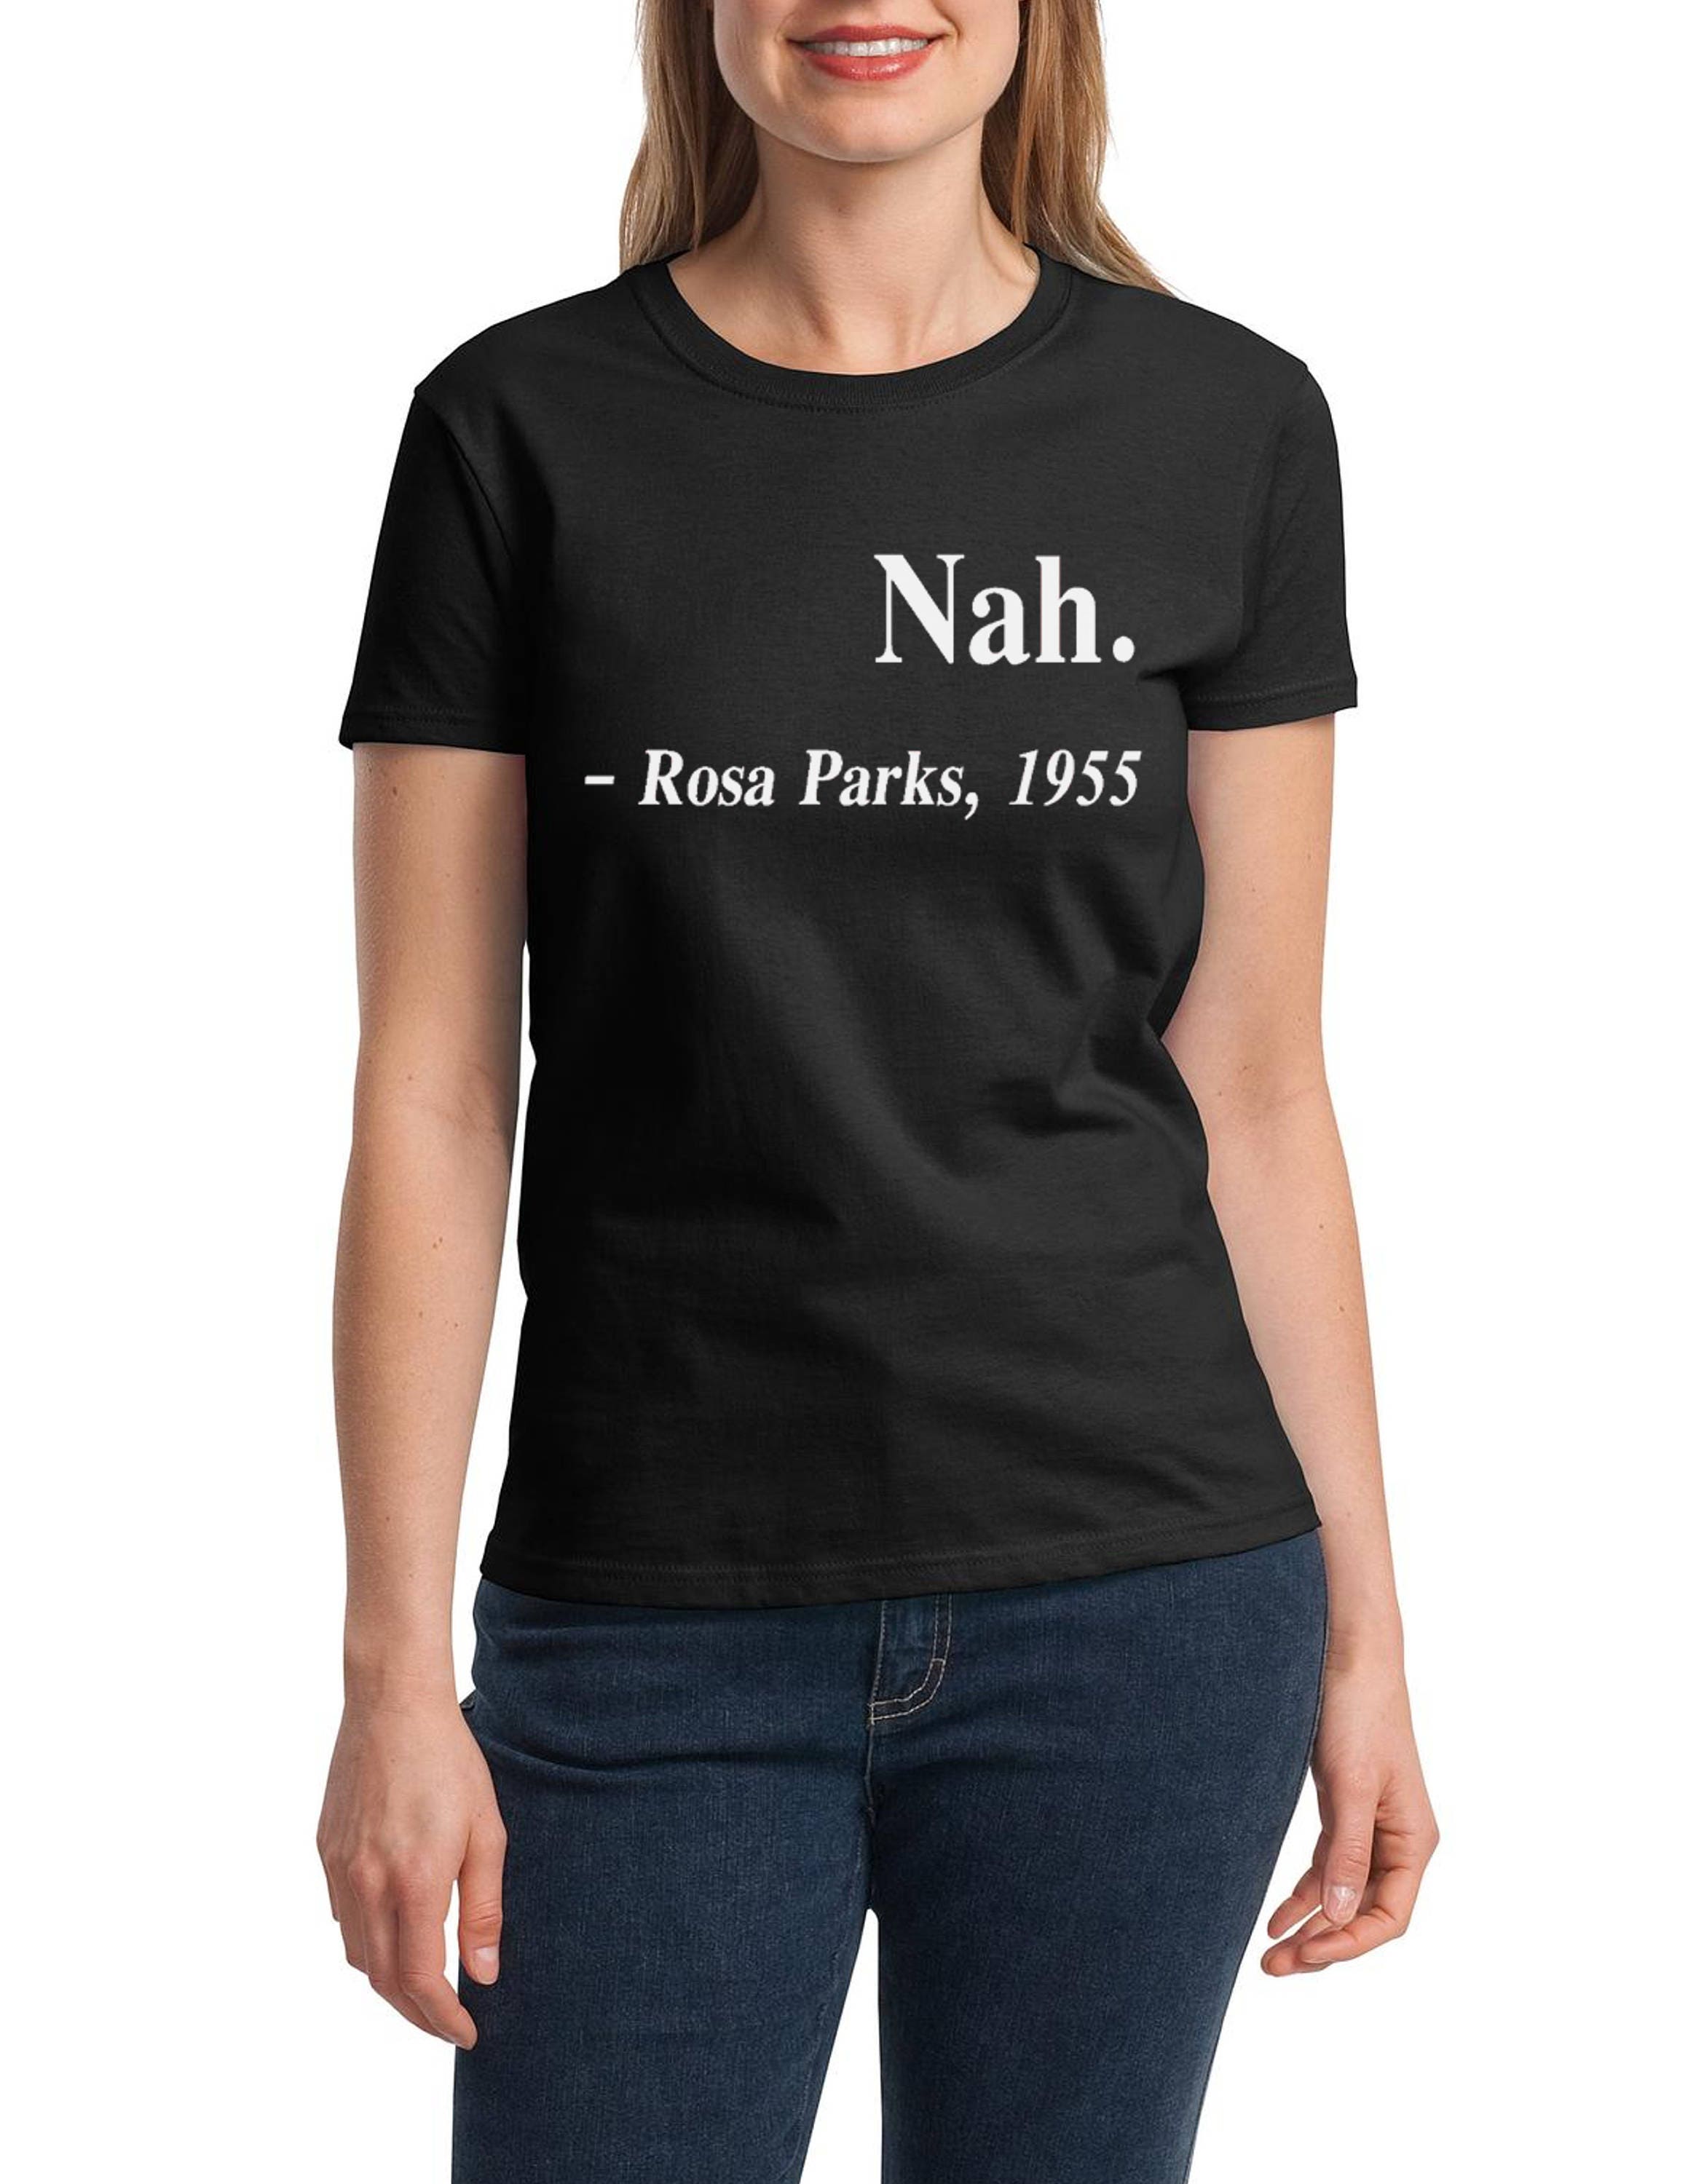 Ladies Nah. Rosa Parks 1955 Tee Justice Freedom T-Shirt | Etsy